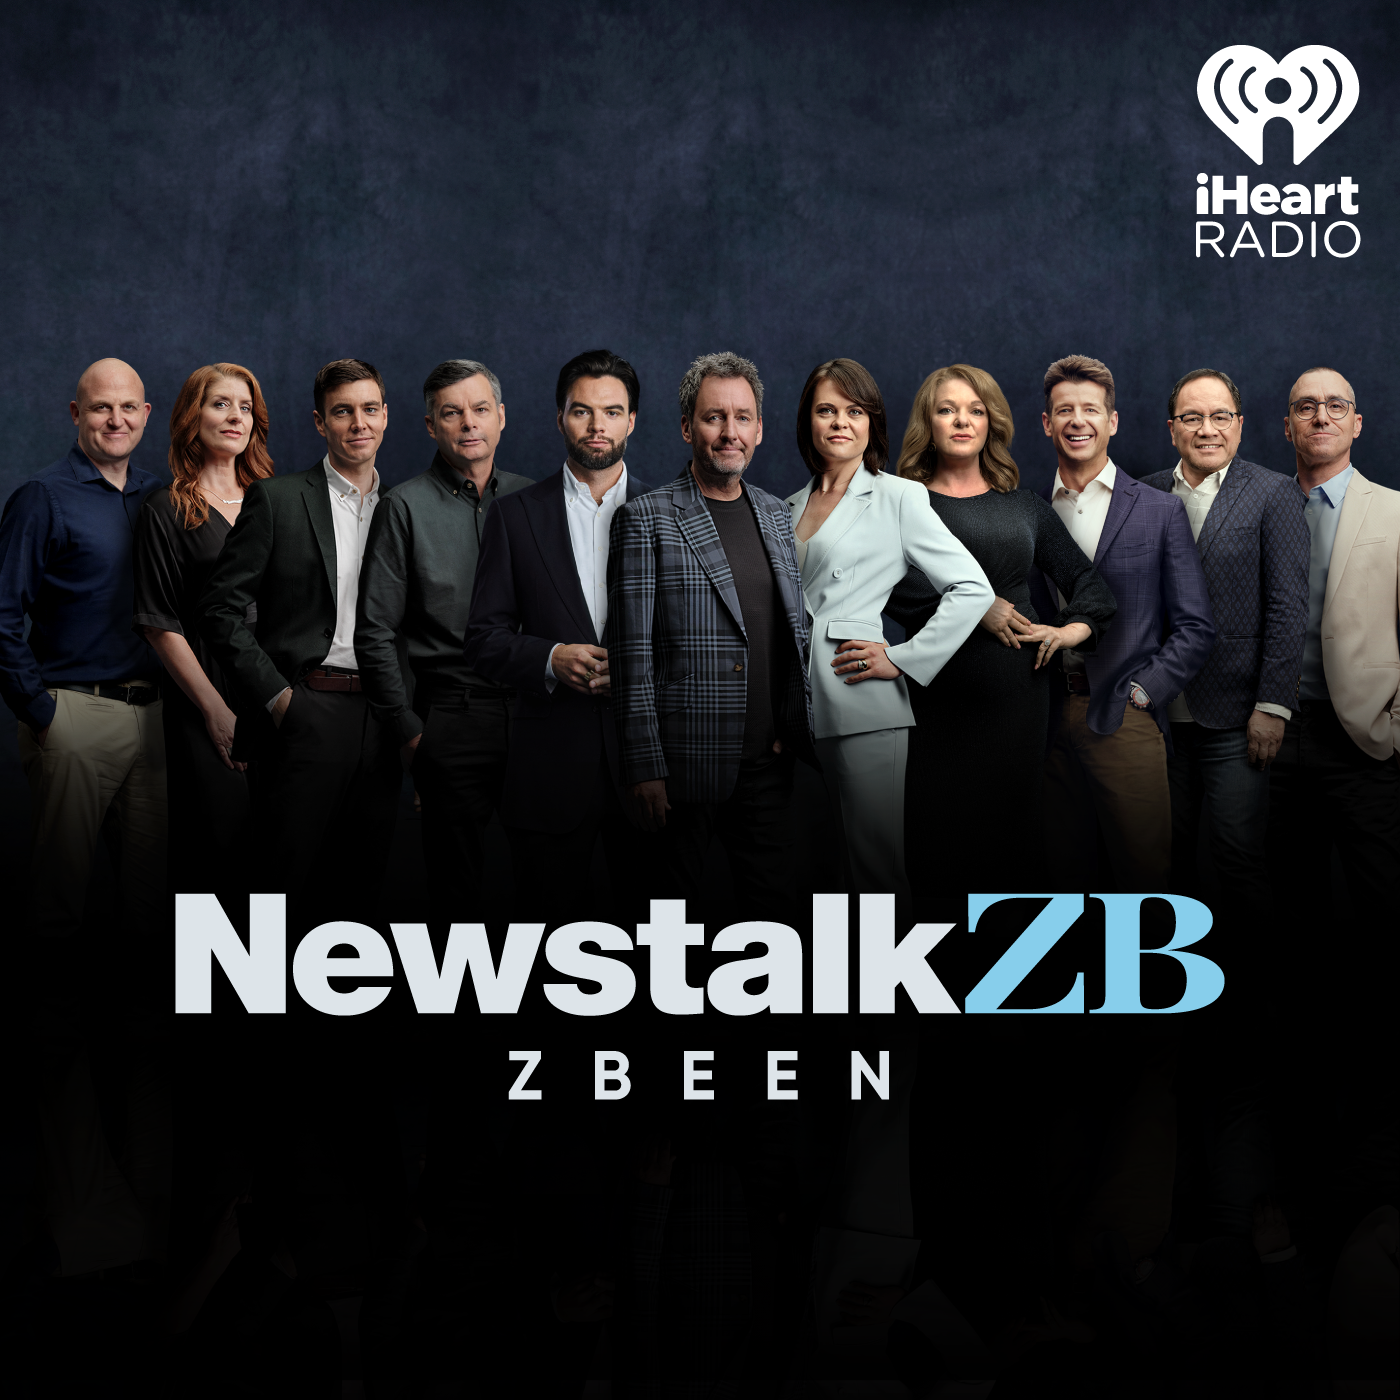 NEWSTALK ZBEEN: Let's Enjoy it While it Lasts